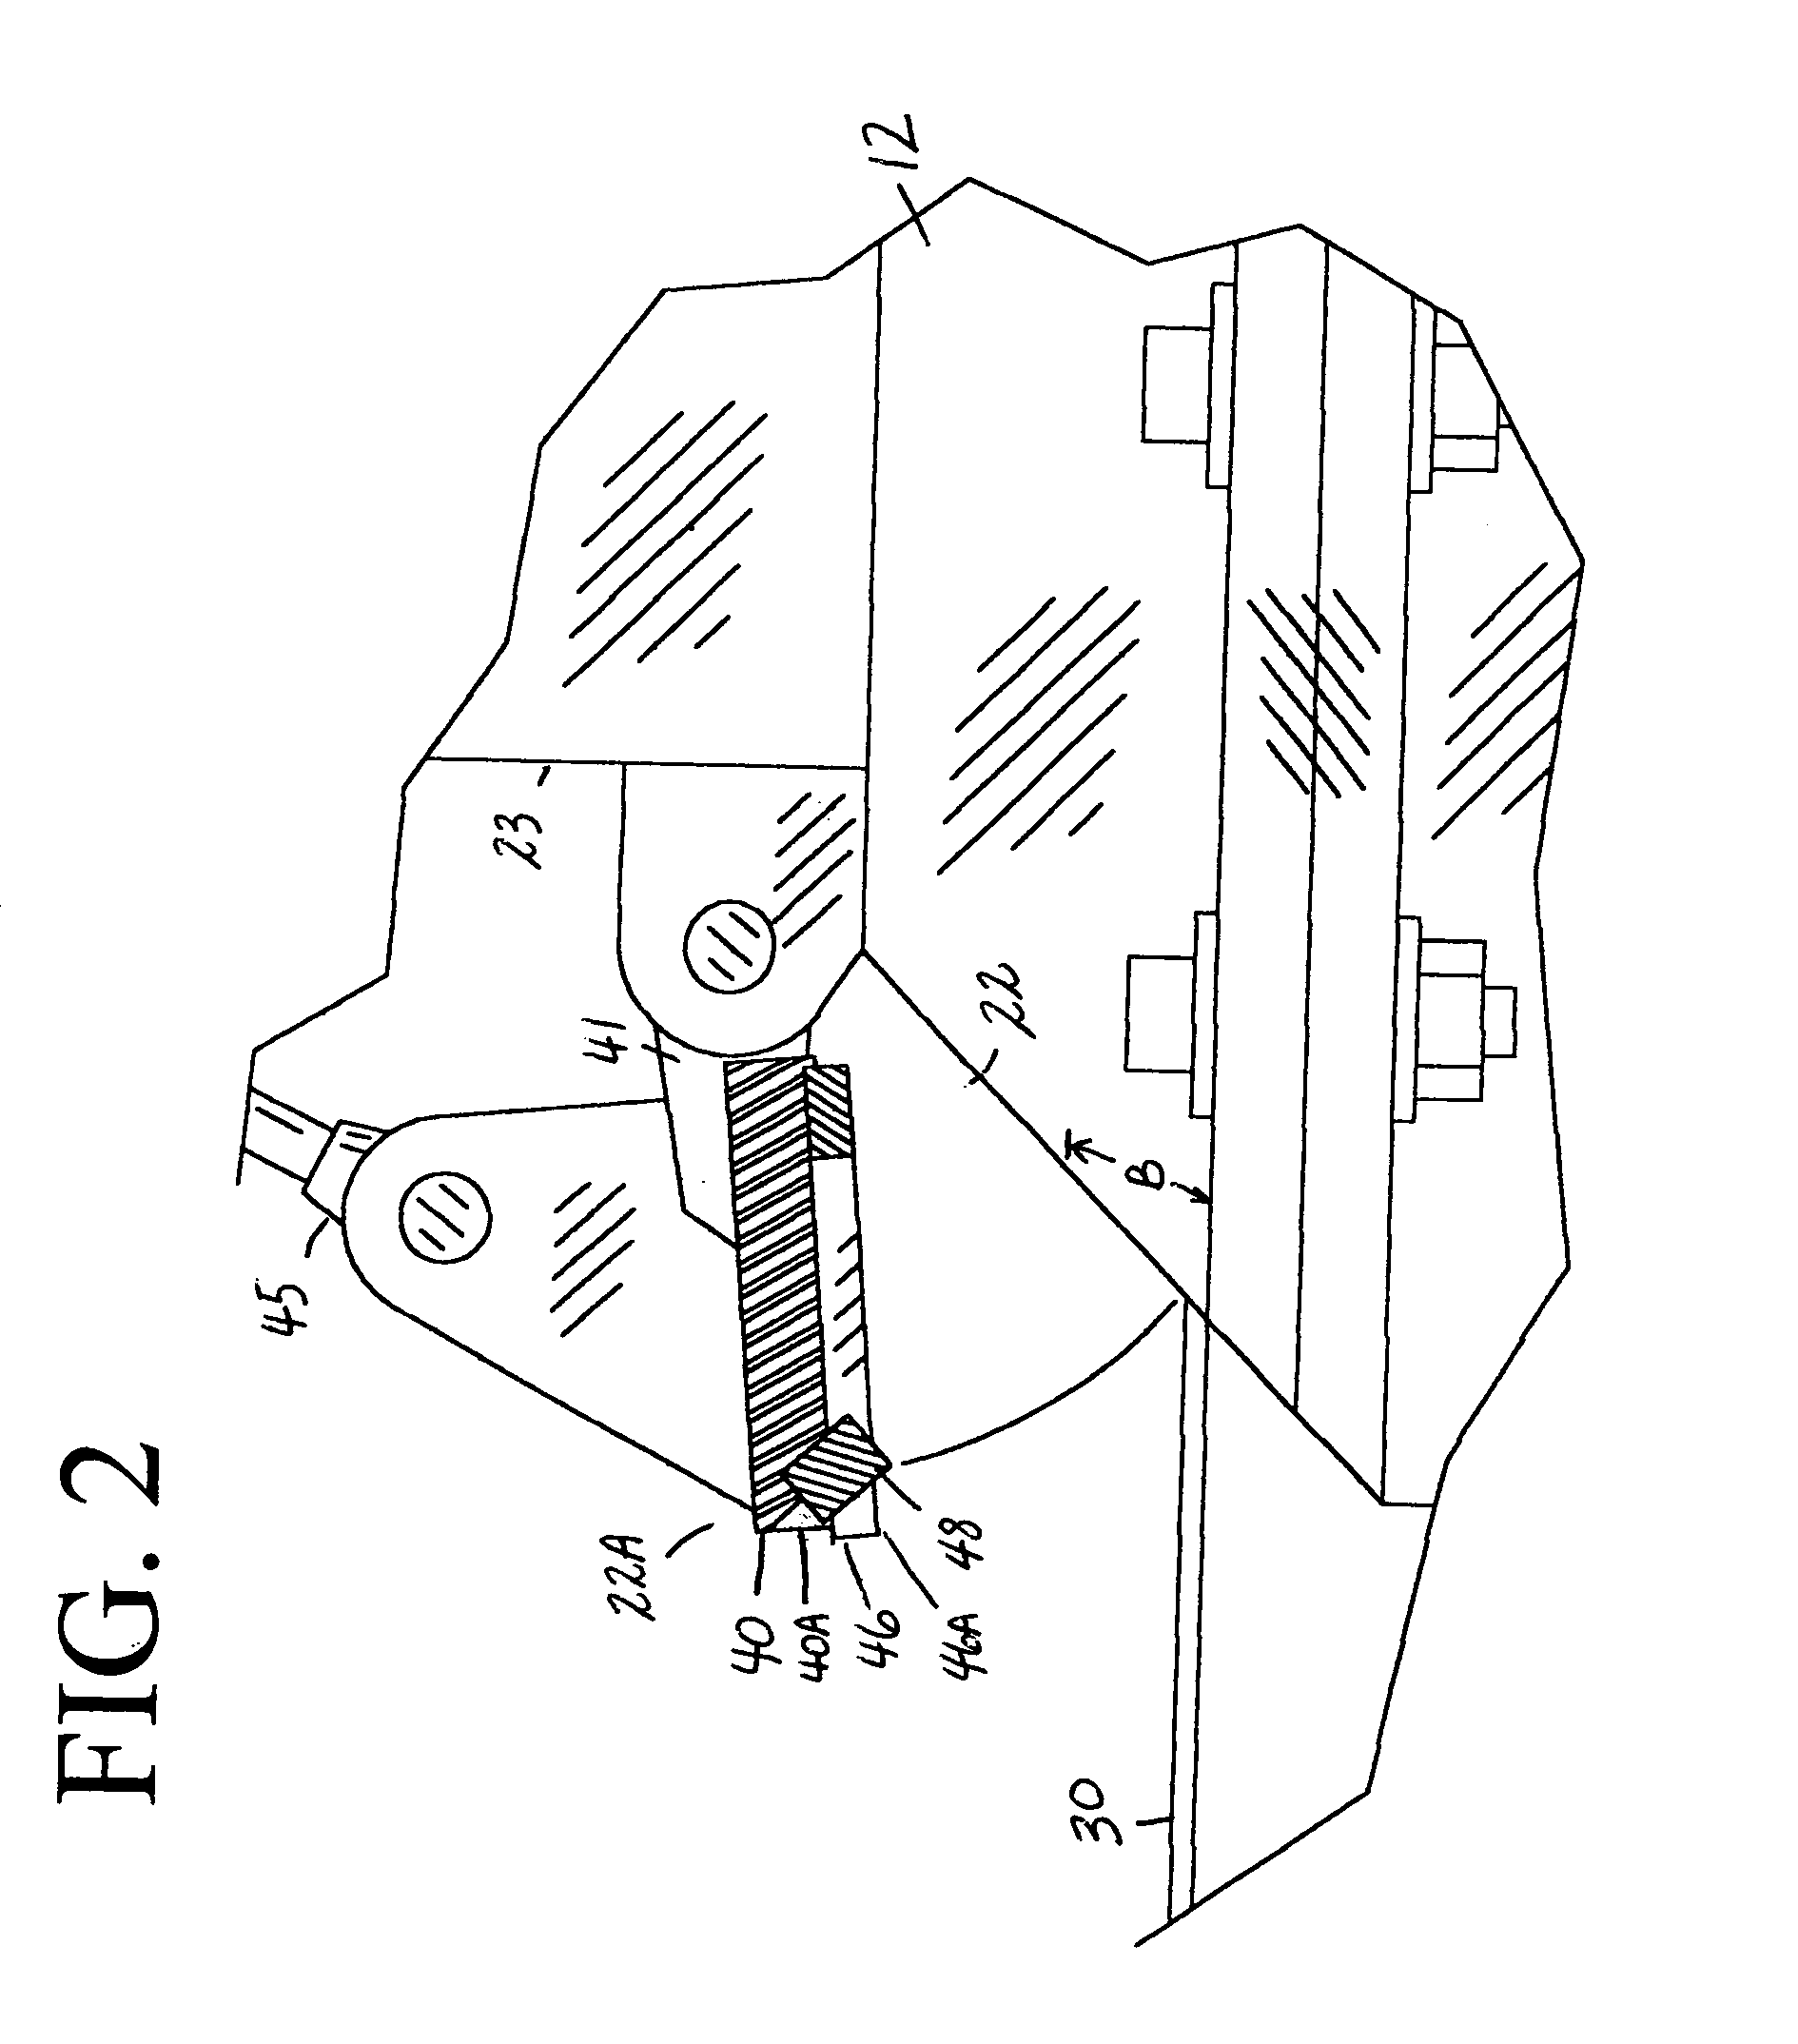 System for solid-liquid separation